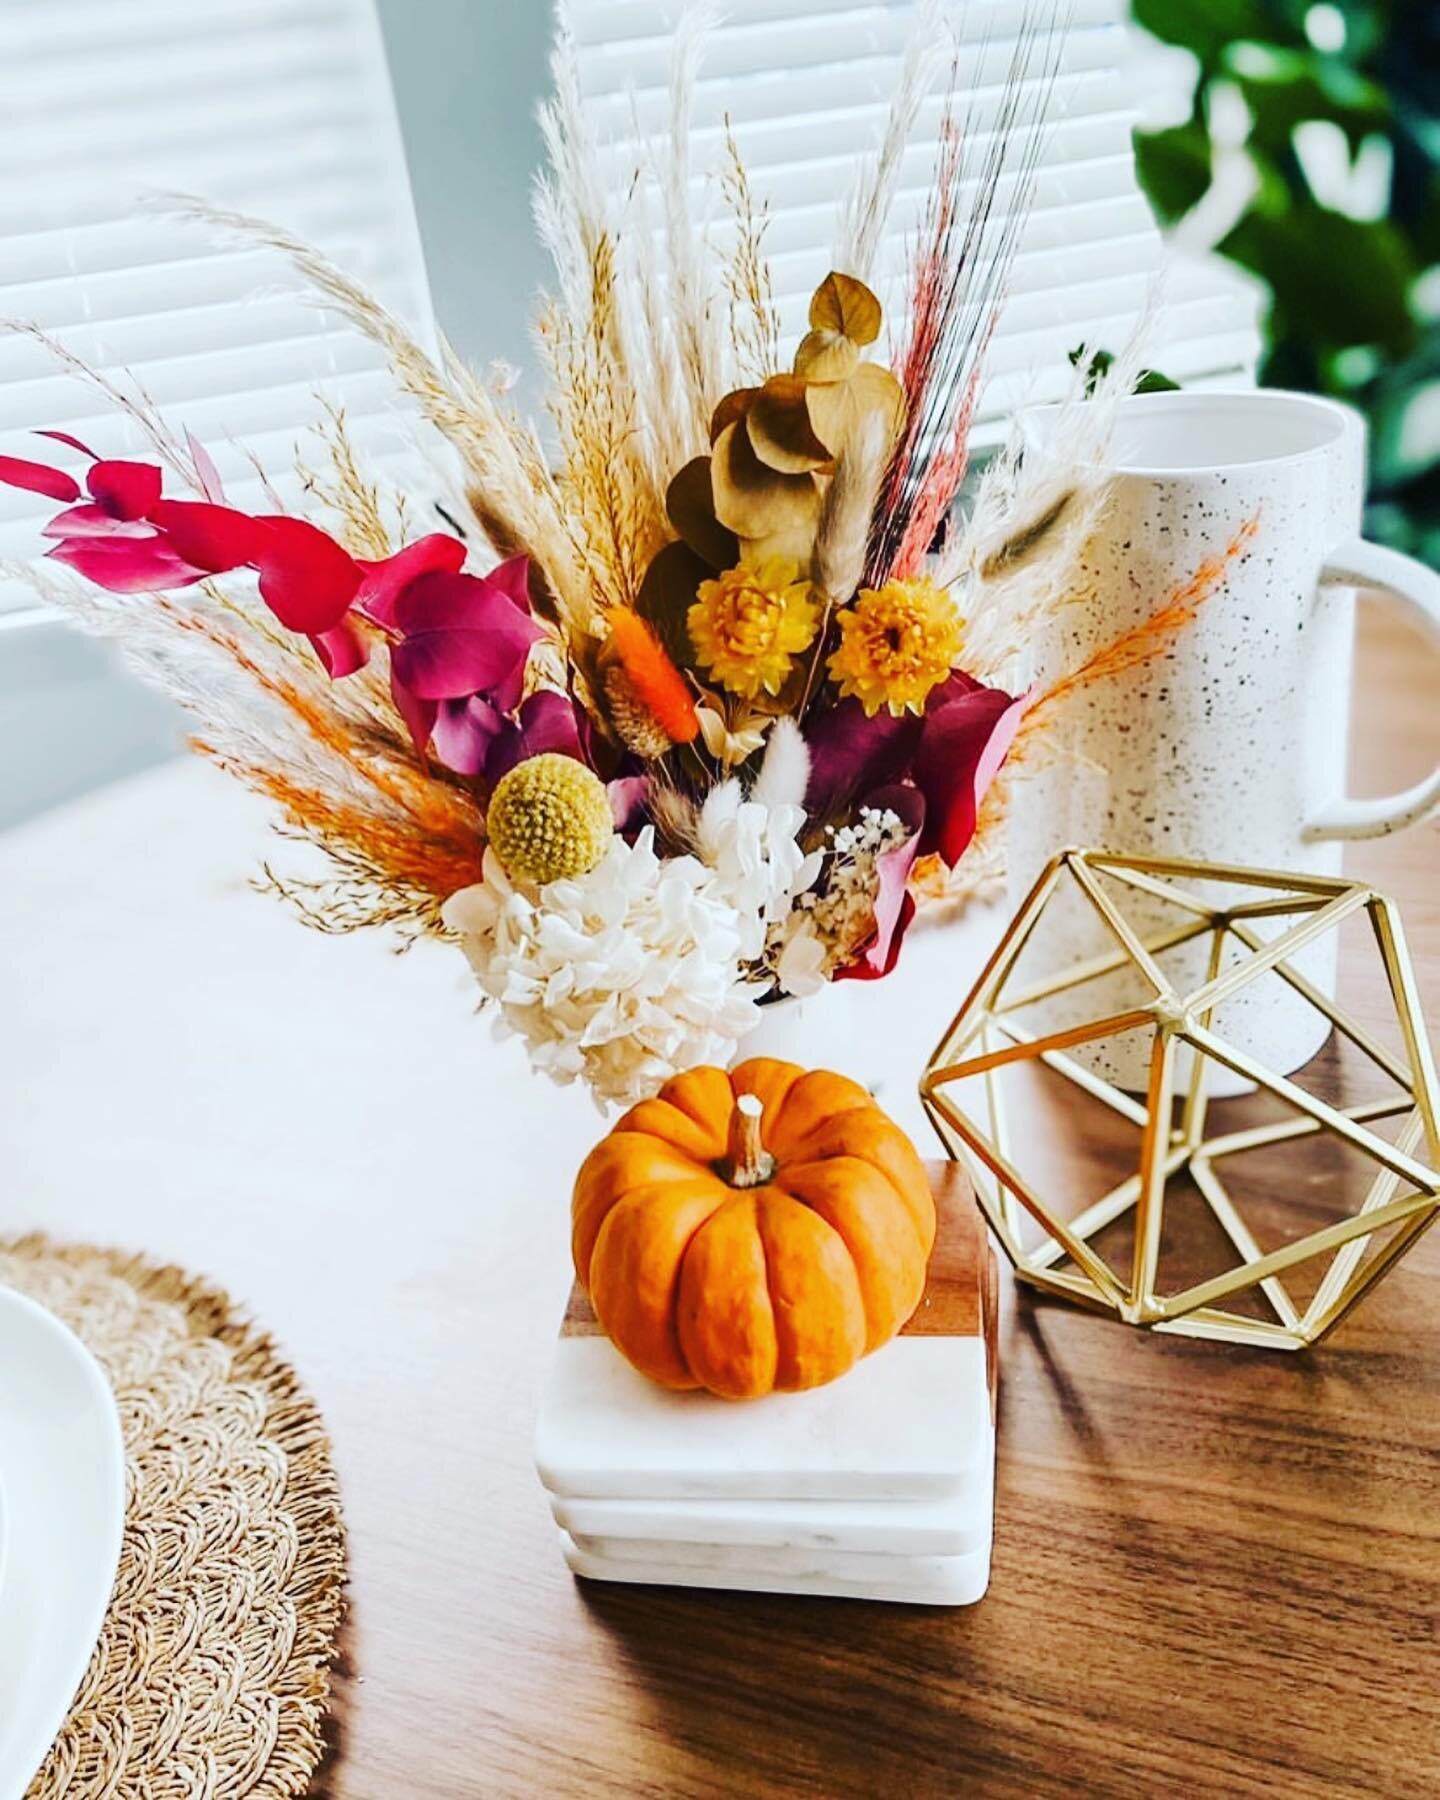 Fall Posies now available !! 🤎🍁

The perfect fall accent for any room and a great gift idea. 

Available with or without the vase. 🍁🍂

#fallflowers #hellofall #fallhomedecor #fallvibes #falldriedflowers #pampas #bohofall